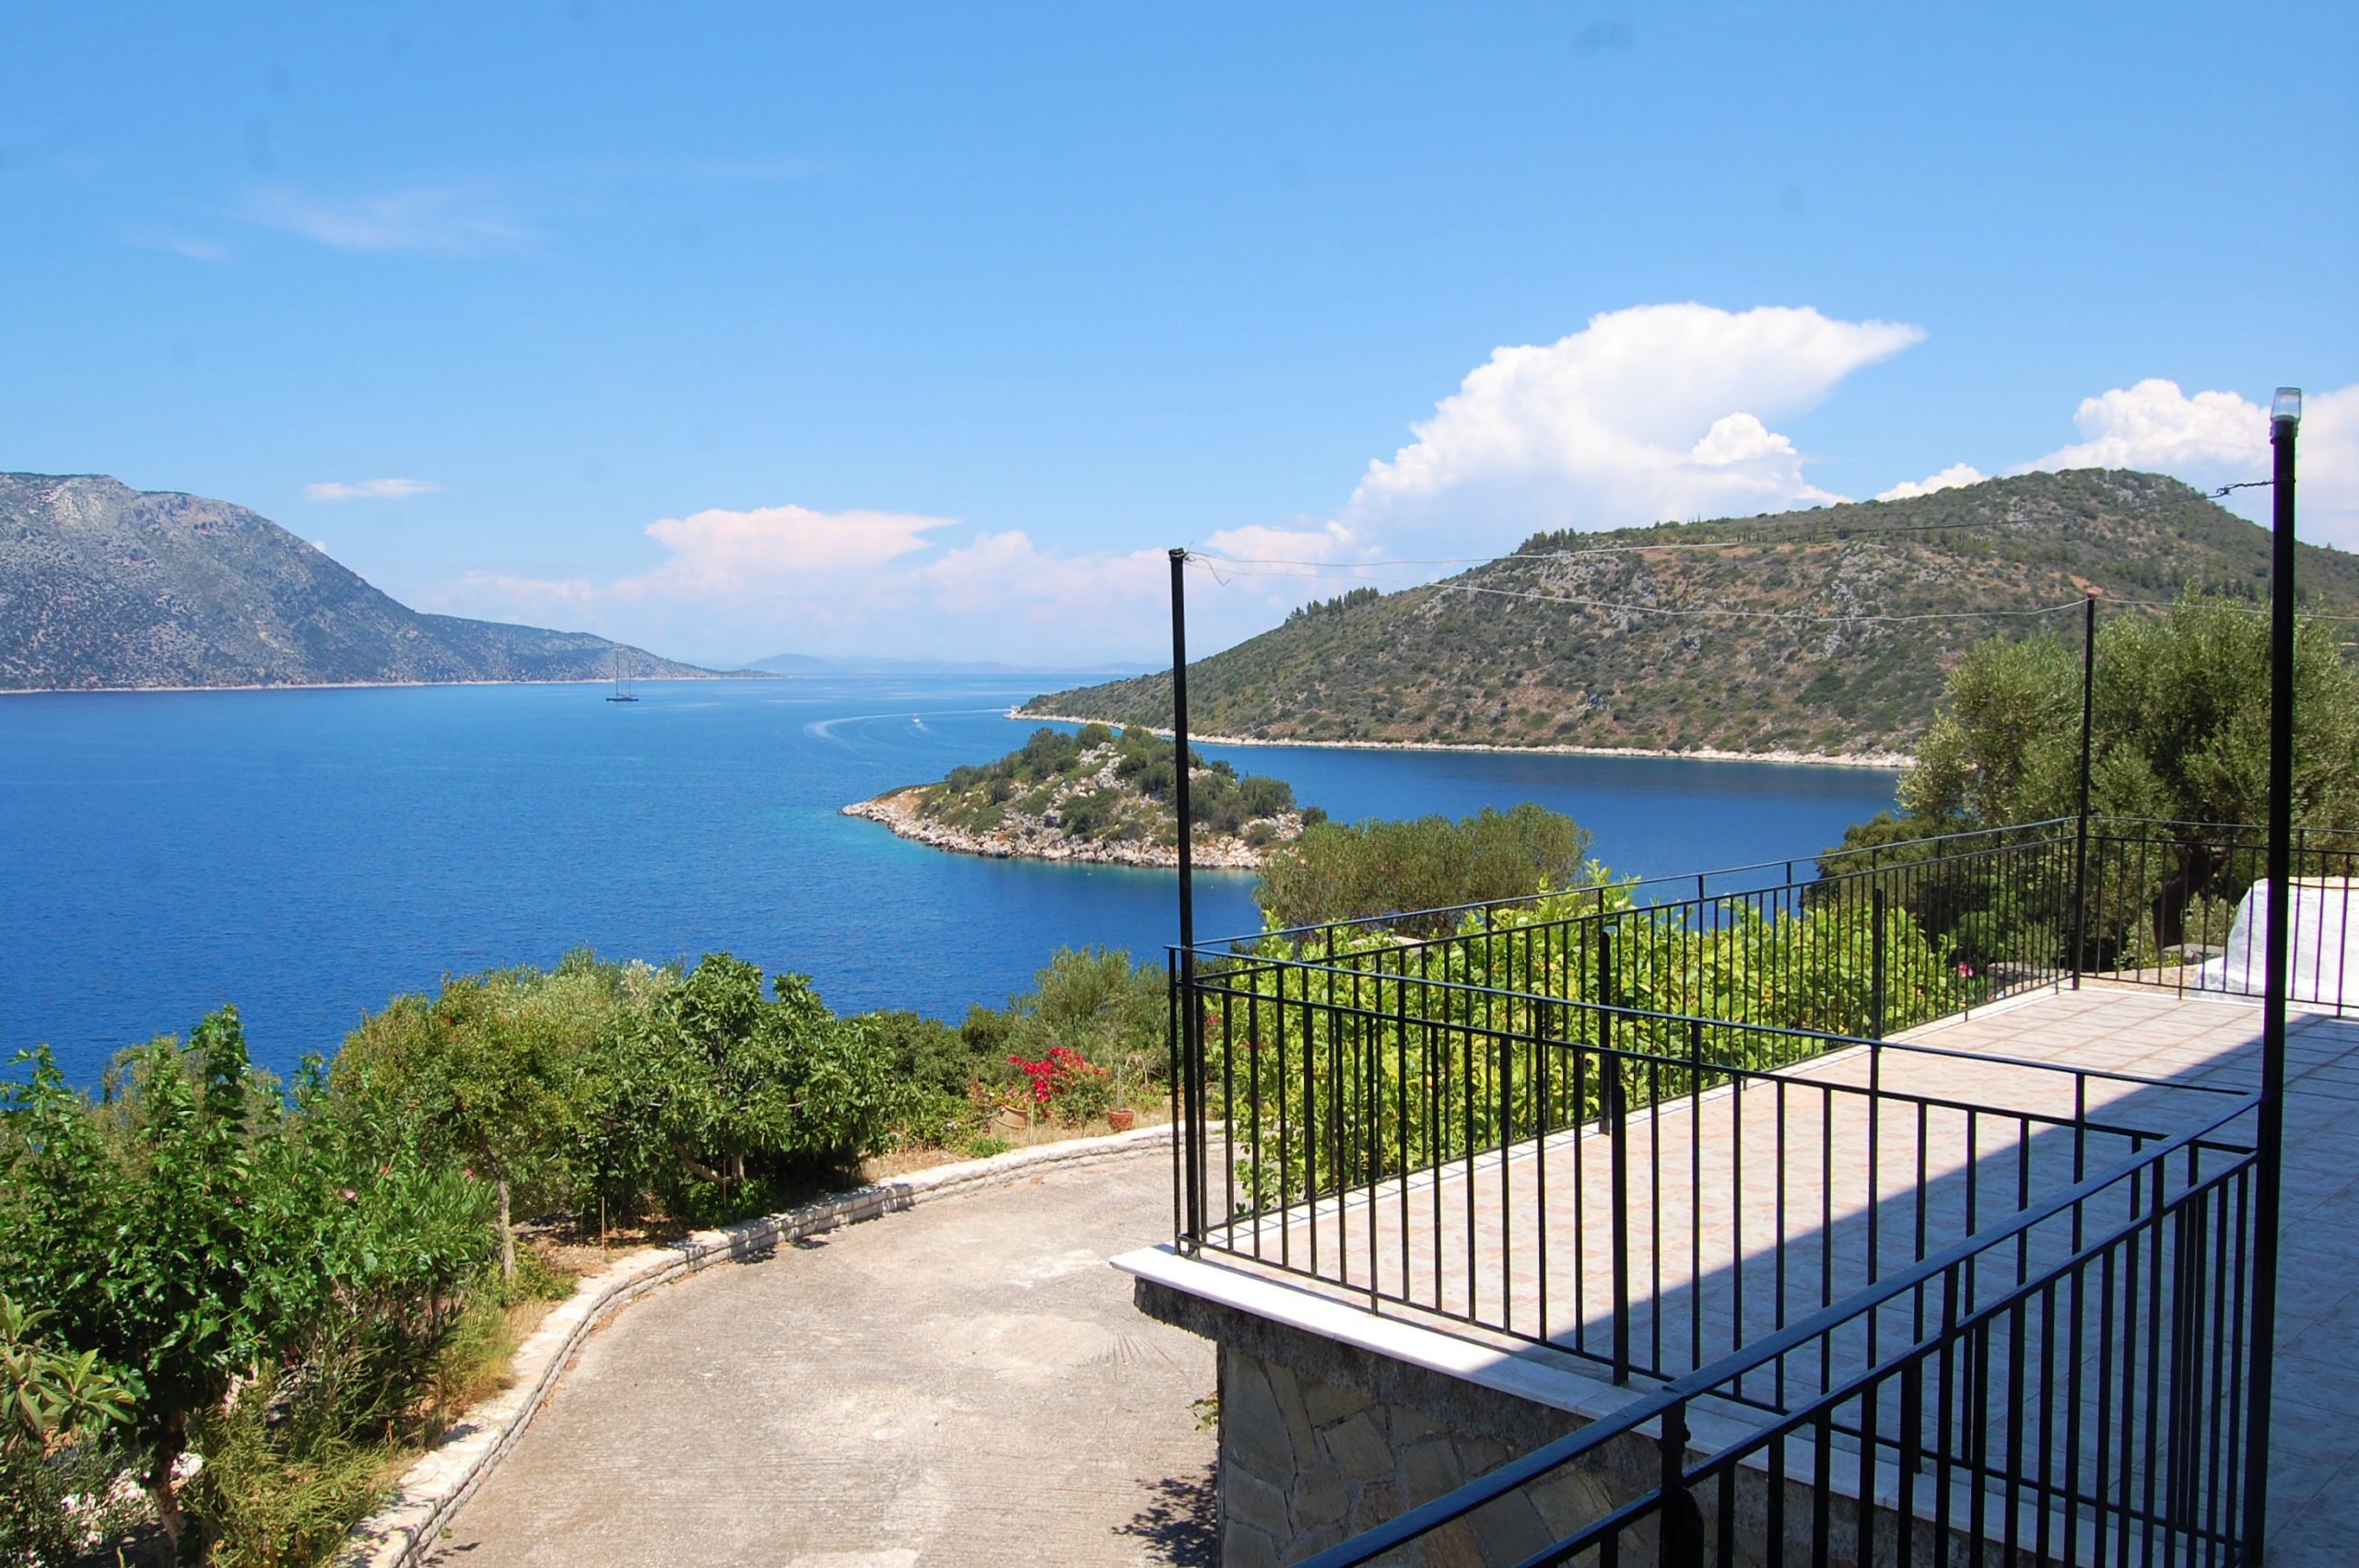 Exterior terrace of holiday apartments for rent on Ithaca Greece, Vathi